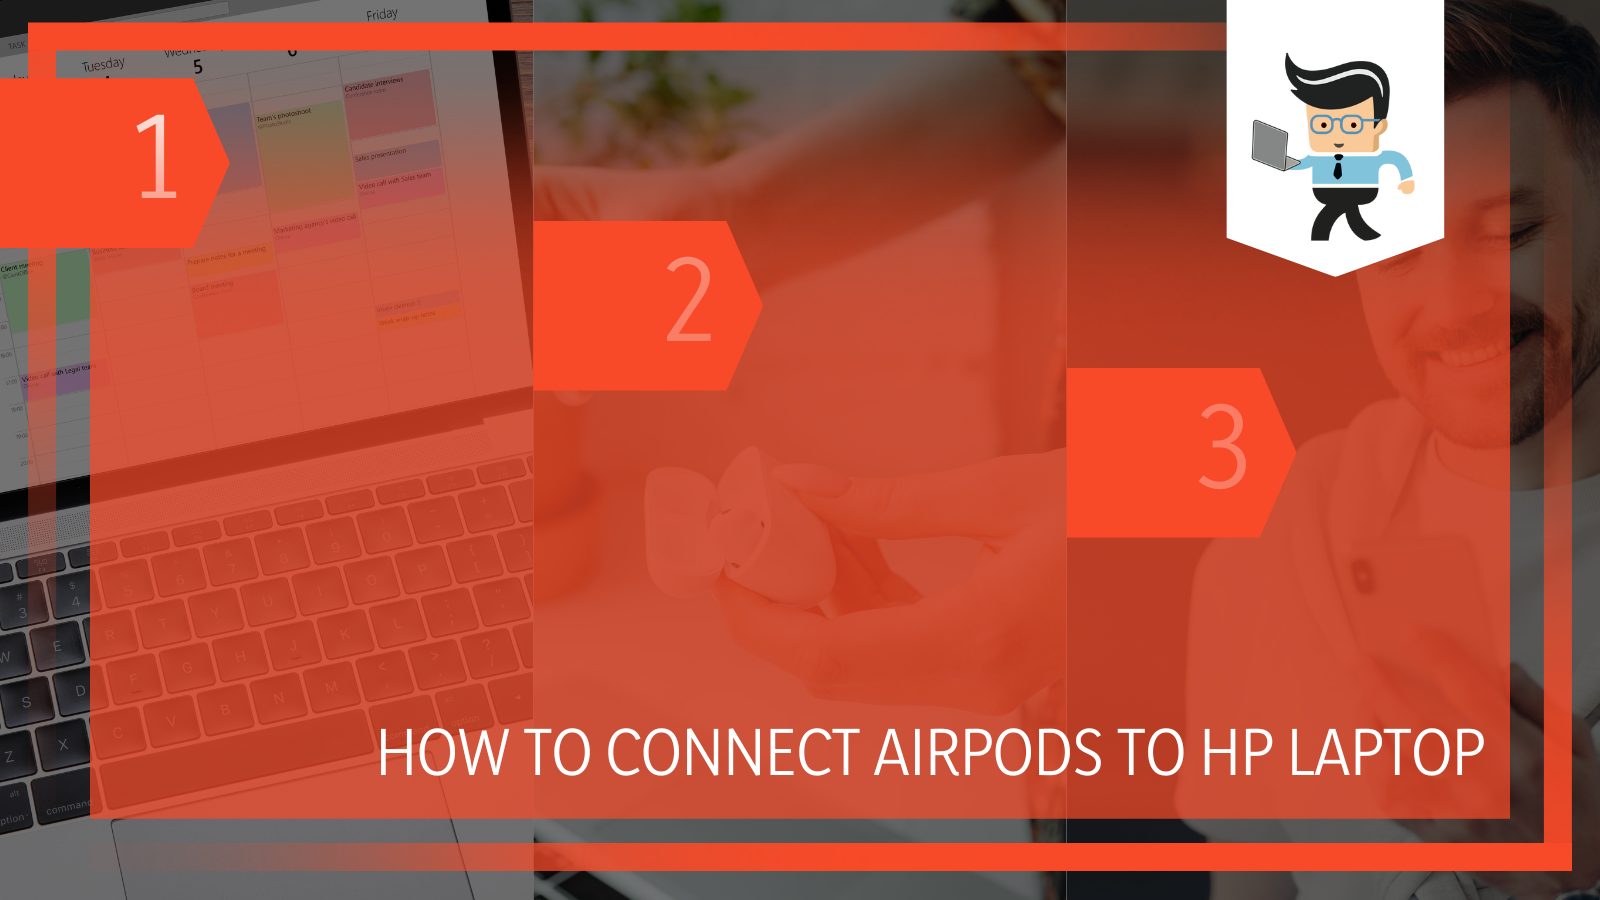 How To Connect AirPods to HP Laptop